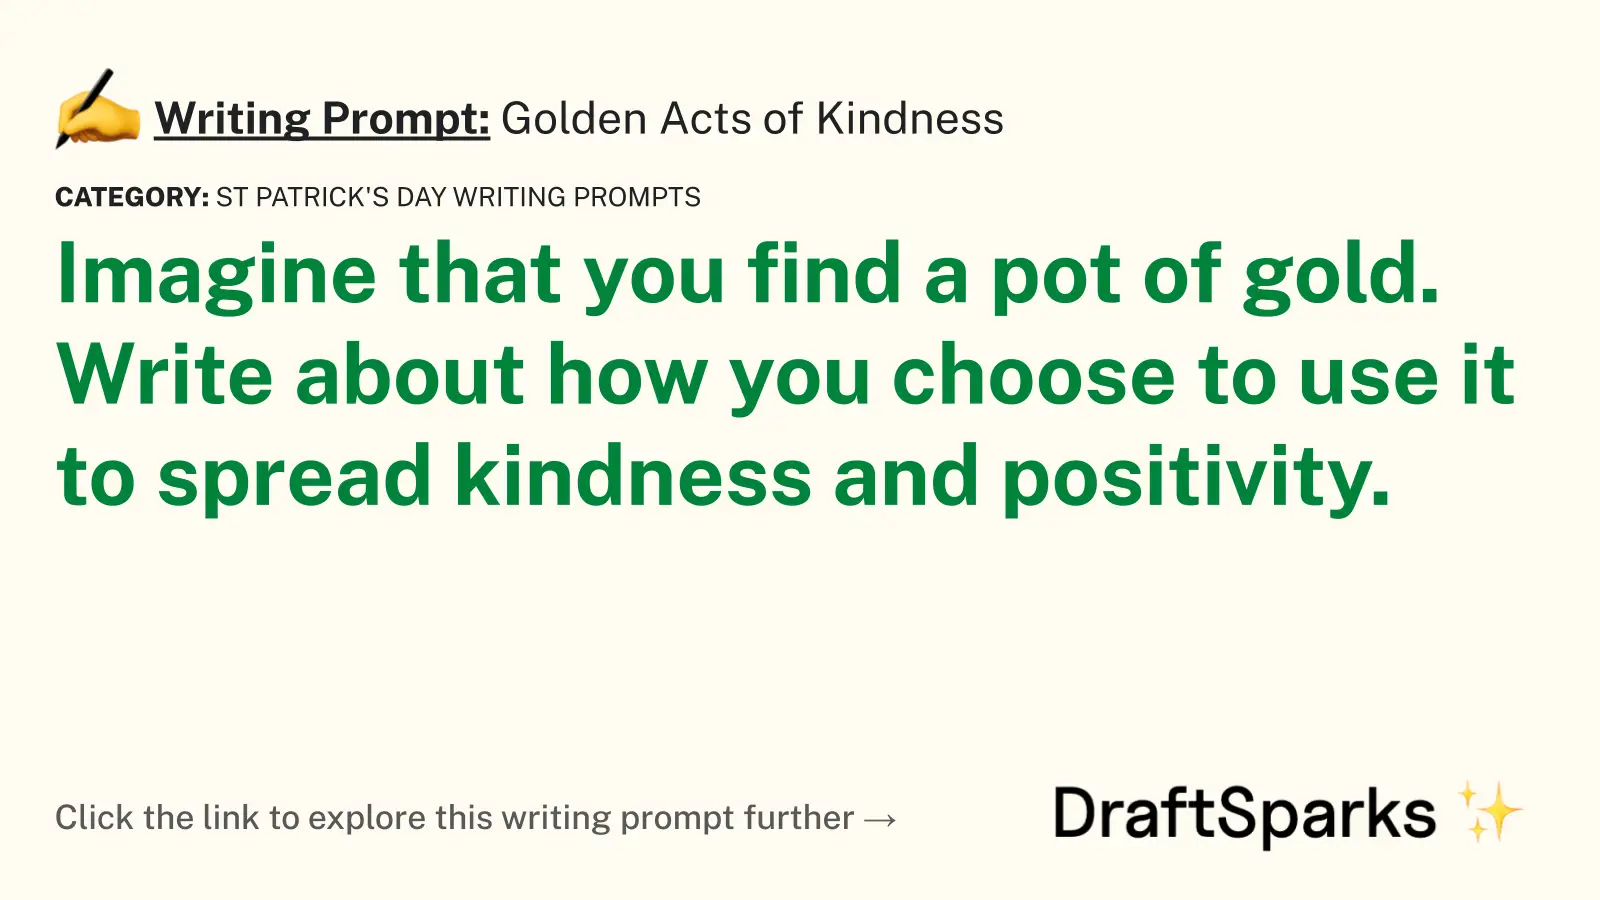 Golden Acts of Kindness